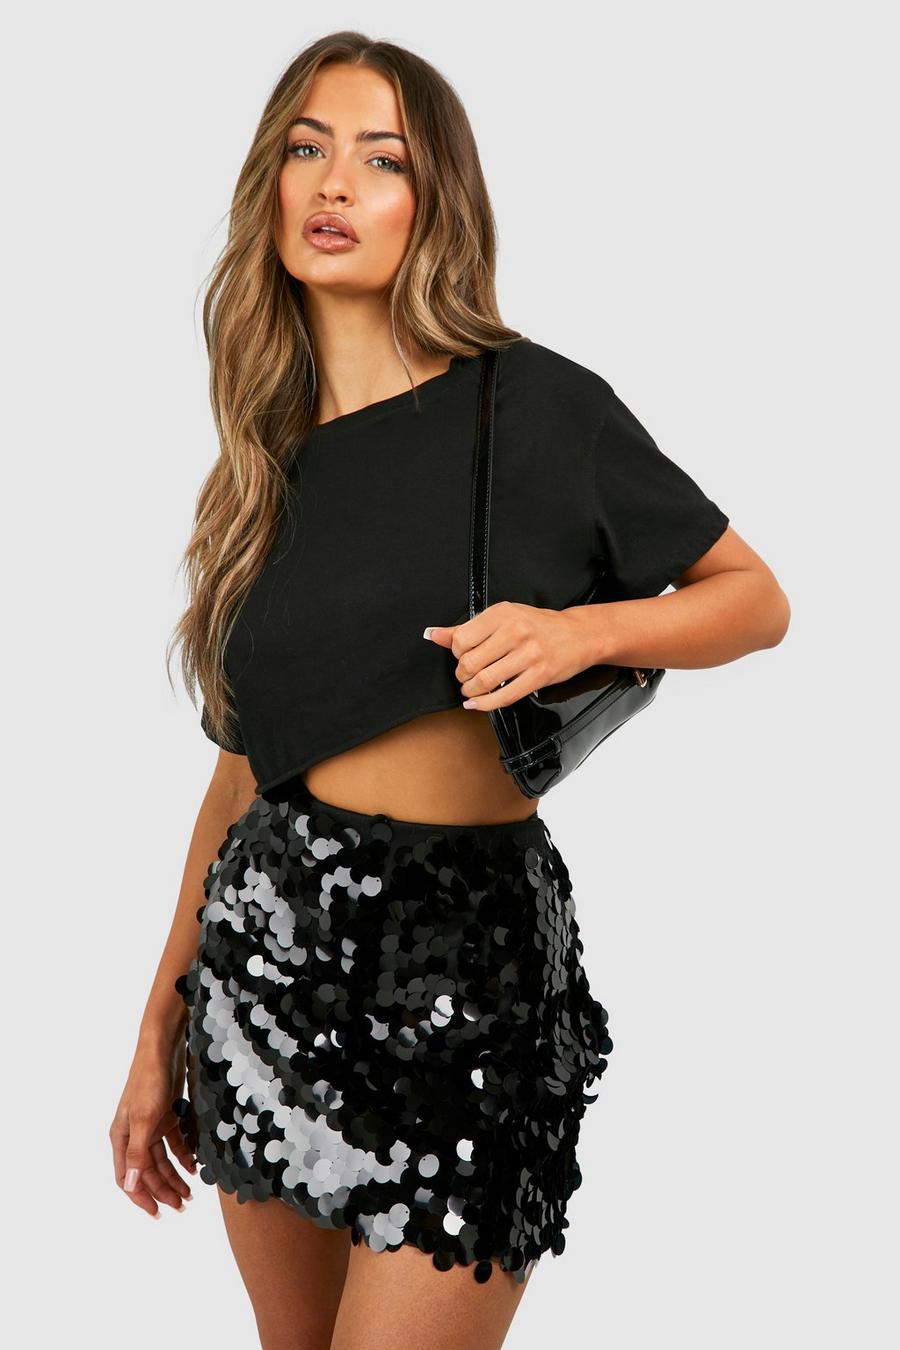 Black Sparkly Skirt And Top | vlr.eng.br